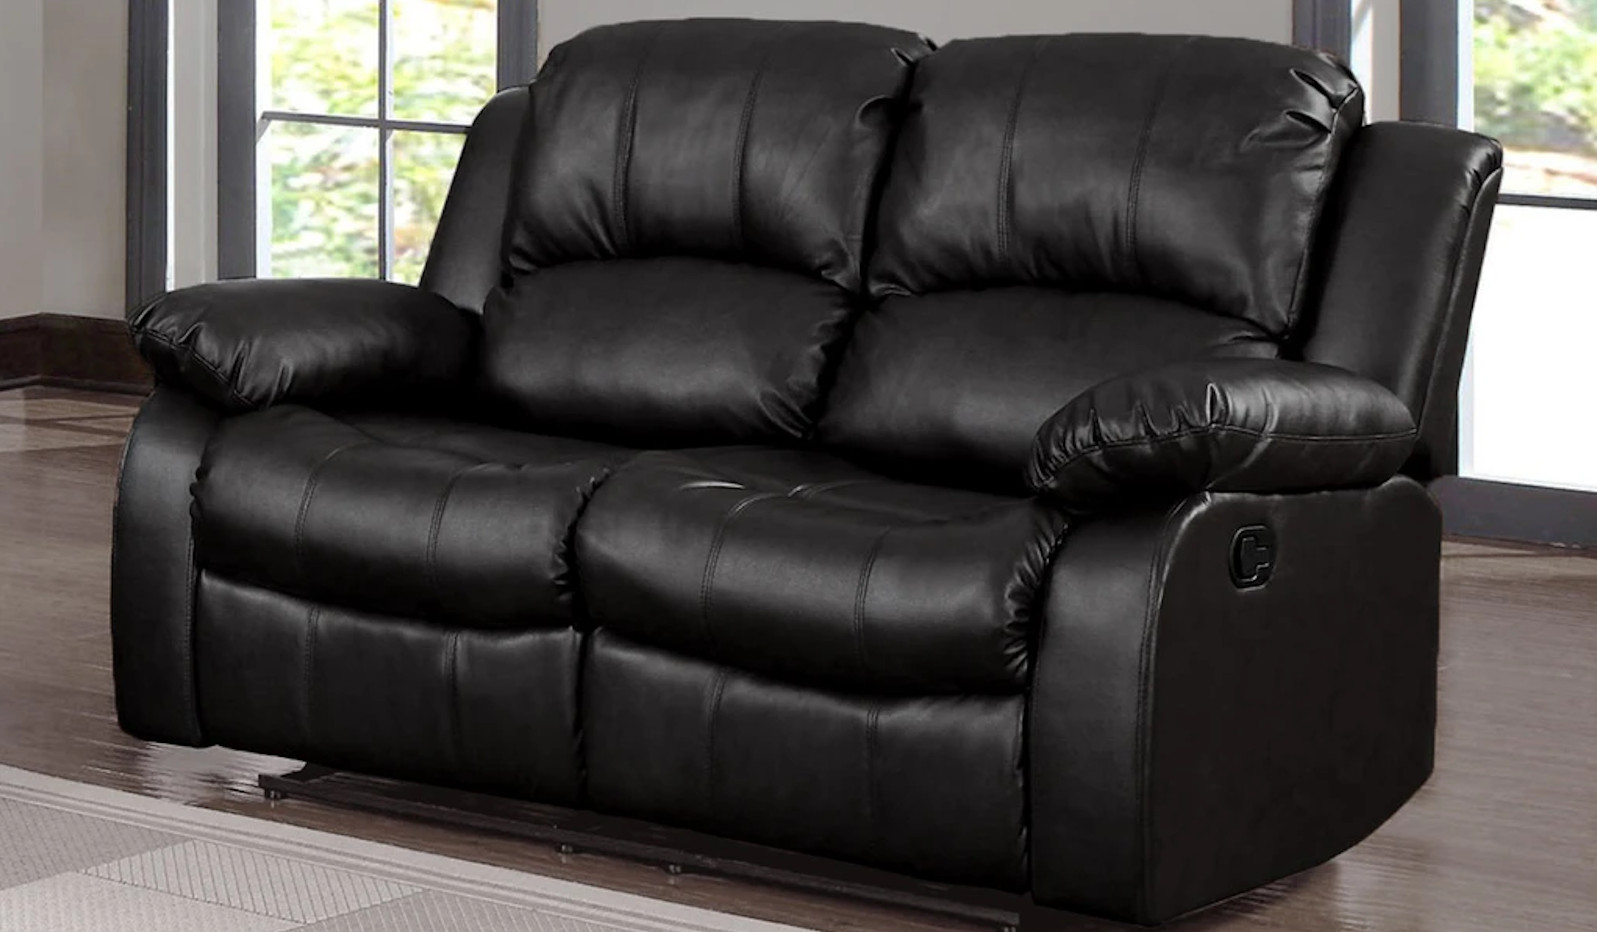 At A Reduced Price recliners